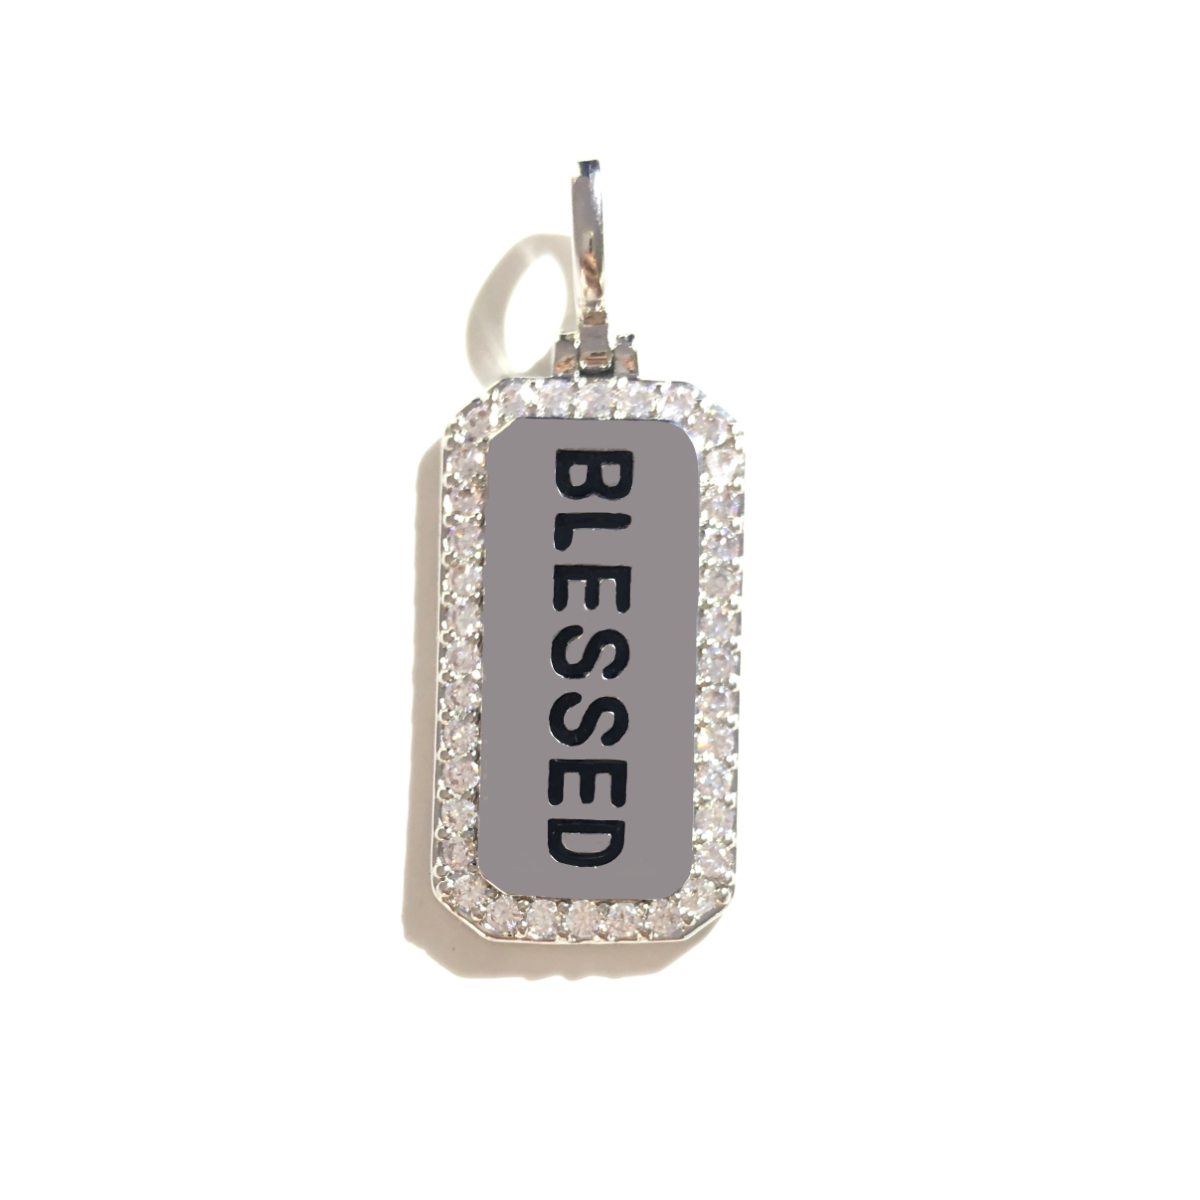 10pcs/lot 38*15mm CZ Paved Blessed Word Tags Charms Pendants Silver CZ Paved Charms Christian Quotes New Charms Arrivals Word Tags Charms Beads Beyond